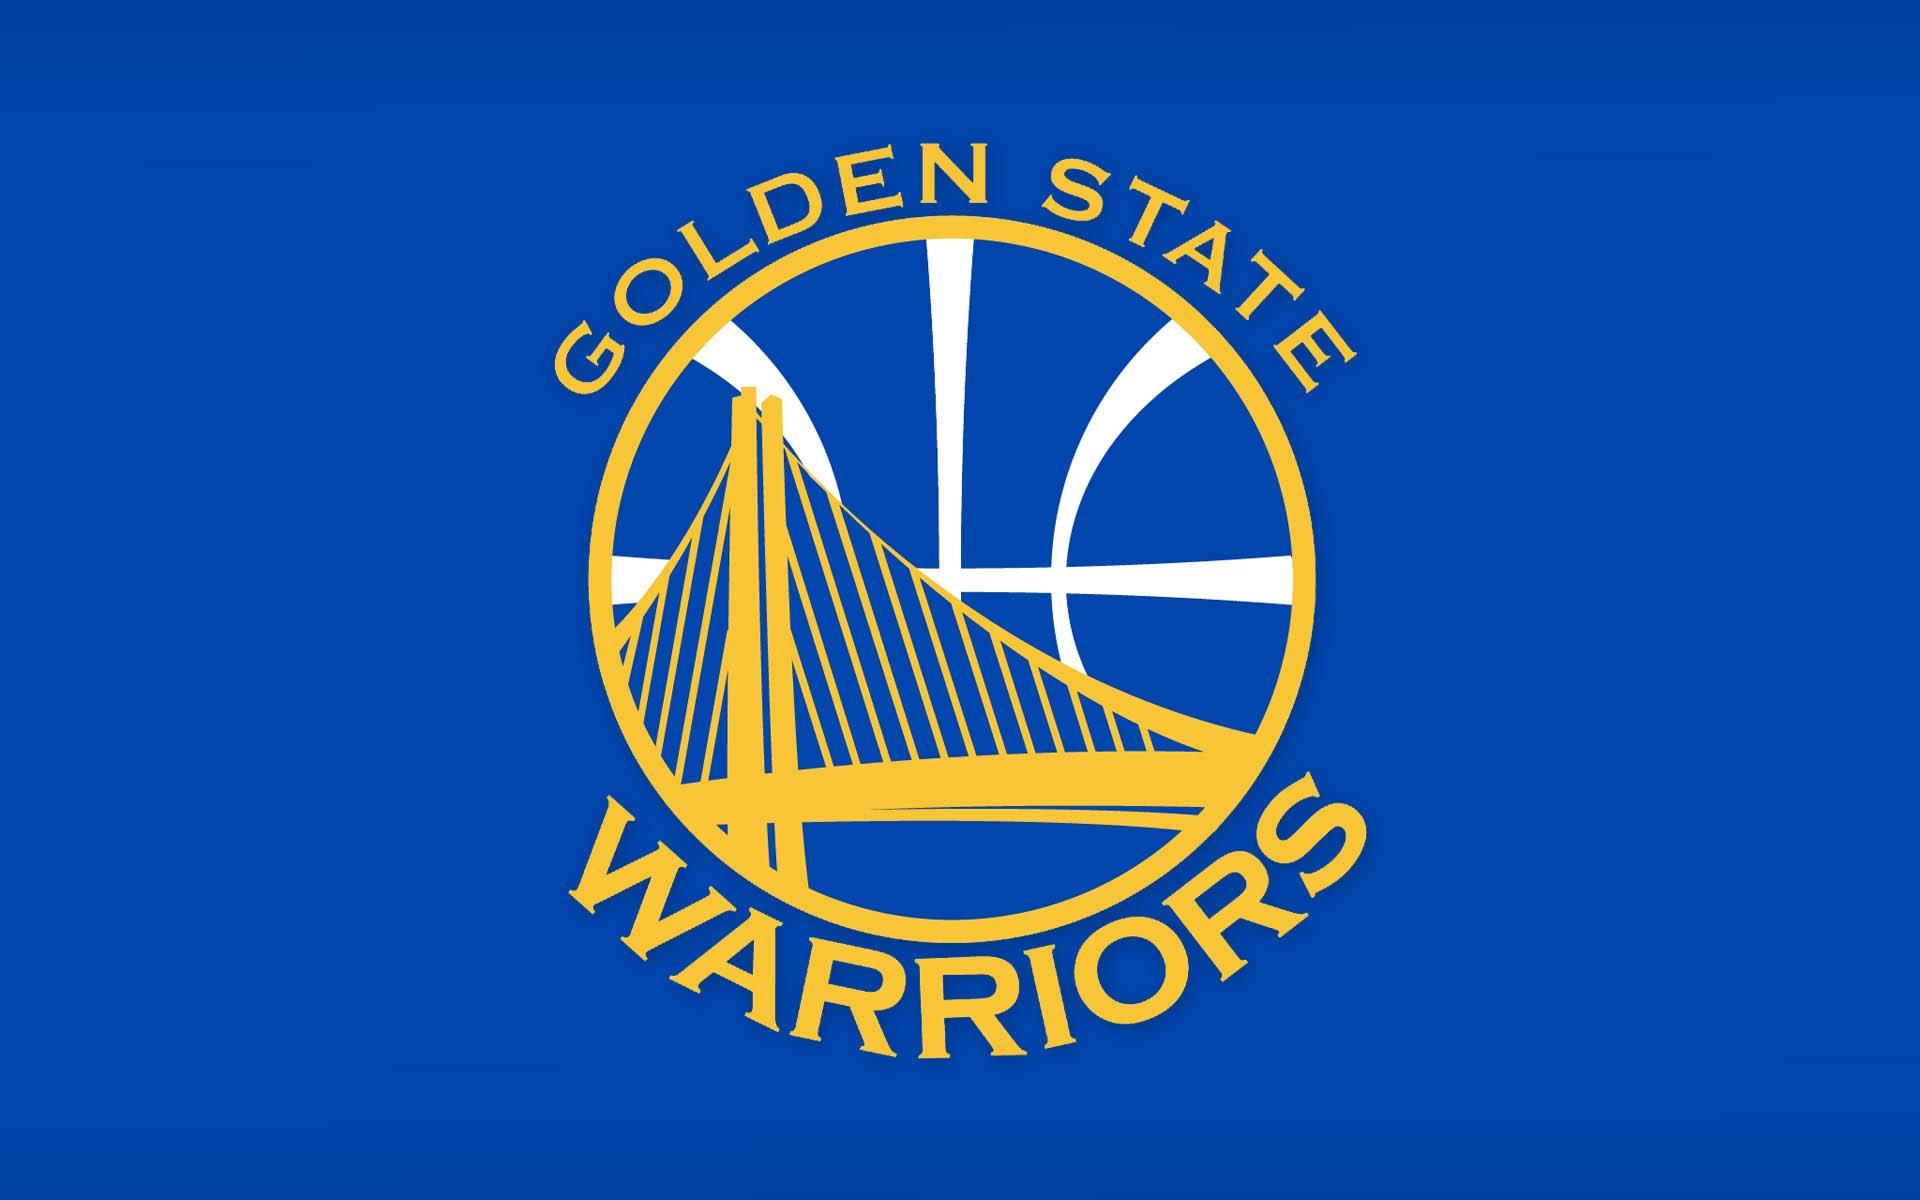 Golden State Warriors Logo - Crooked Scoreboard: Humor and Culture In Sports | How to Beat the ...